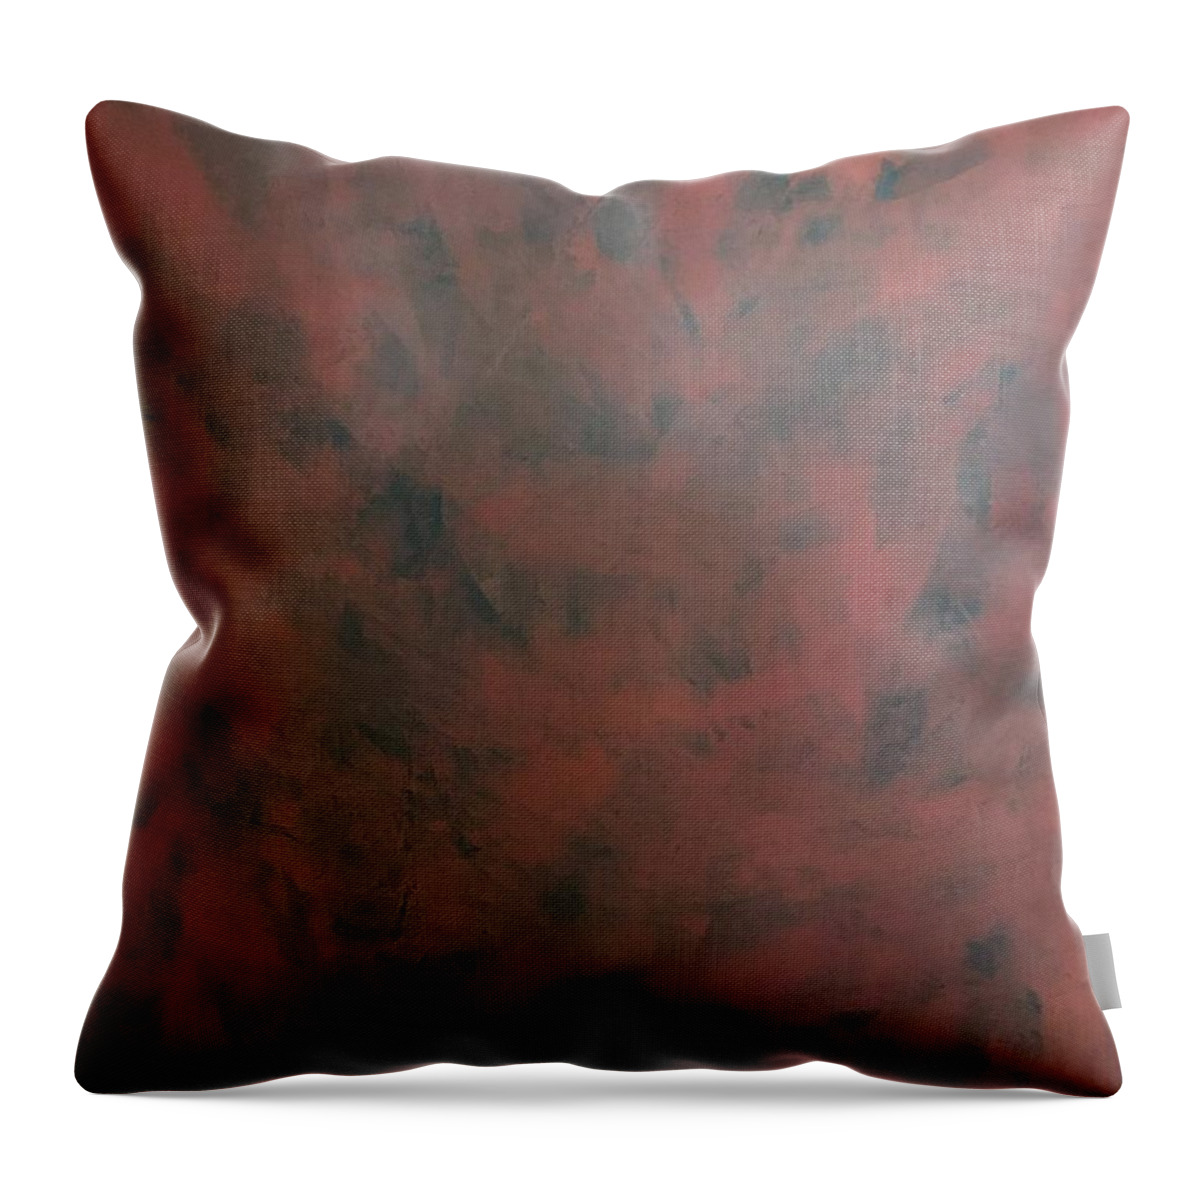  Throw Pillow featuring the painting Vapour by Greg Powell